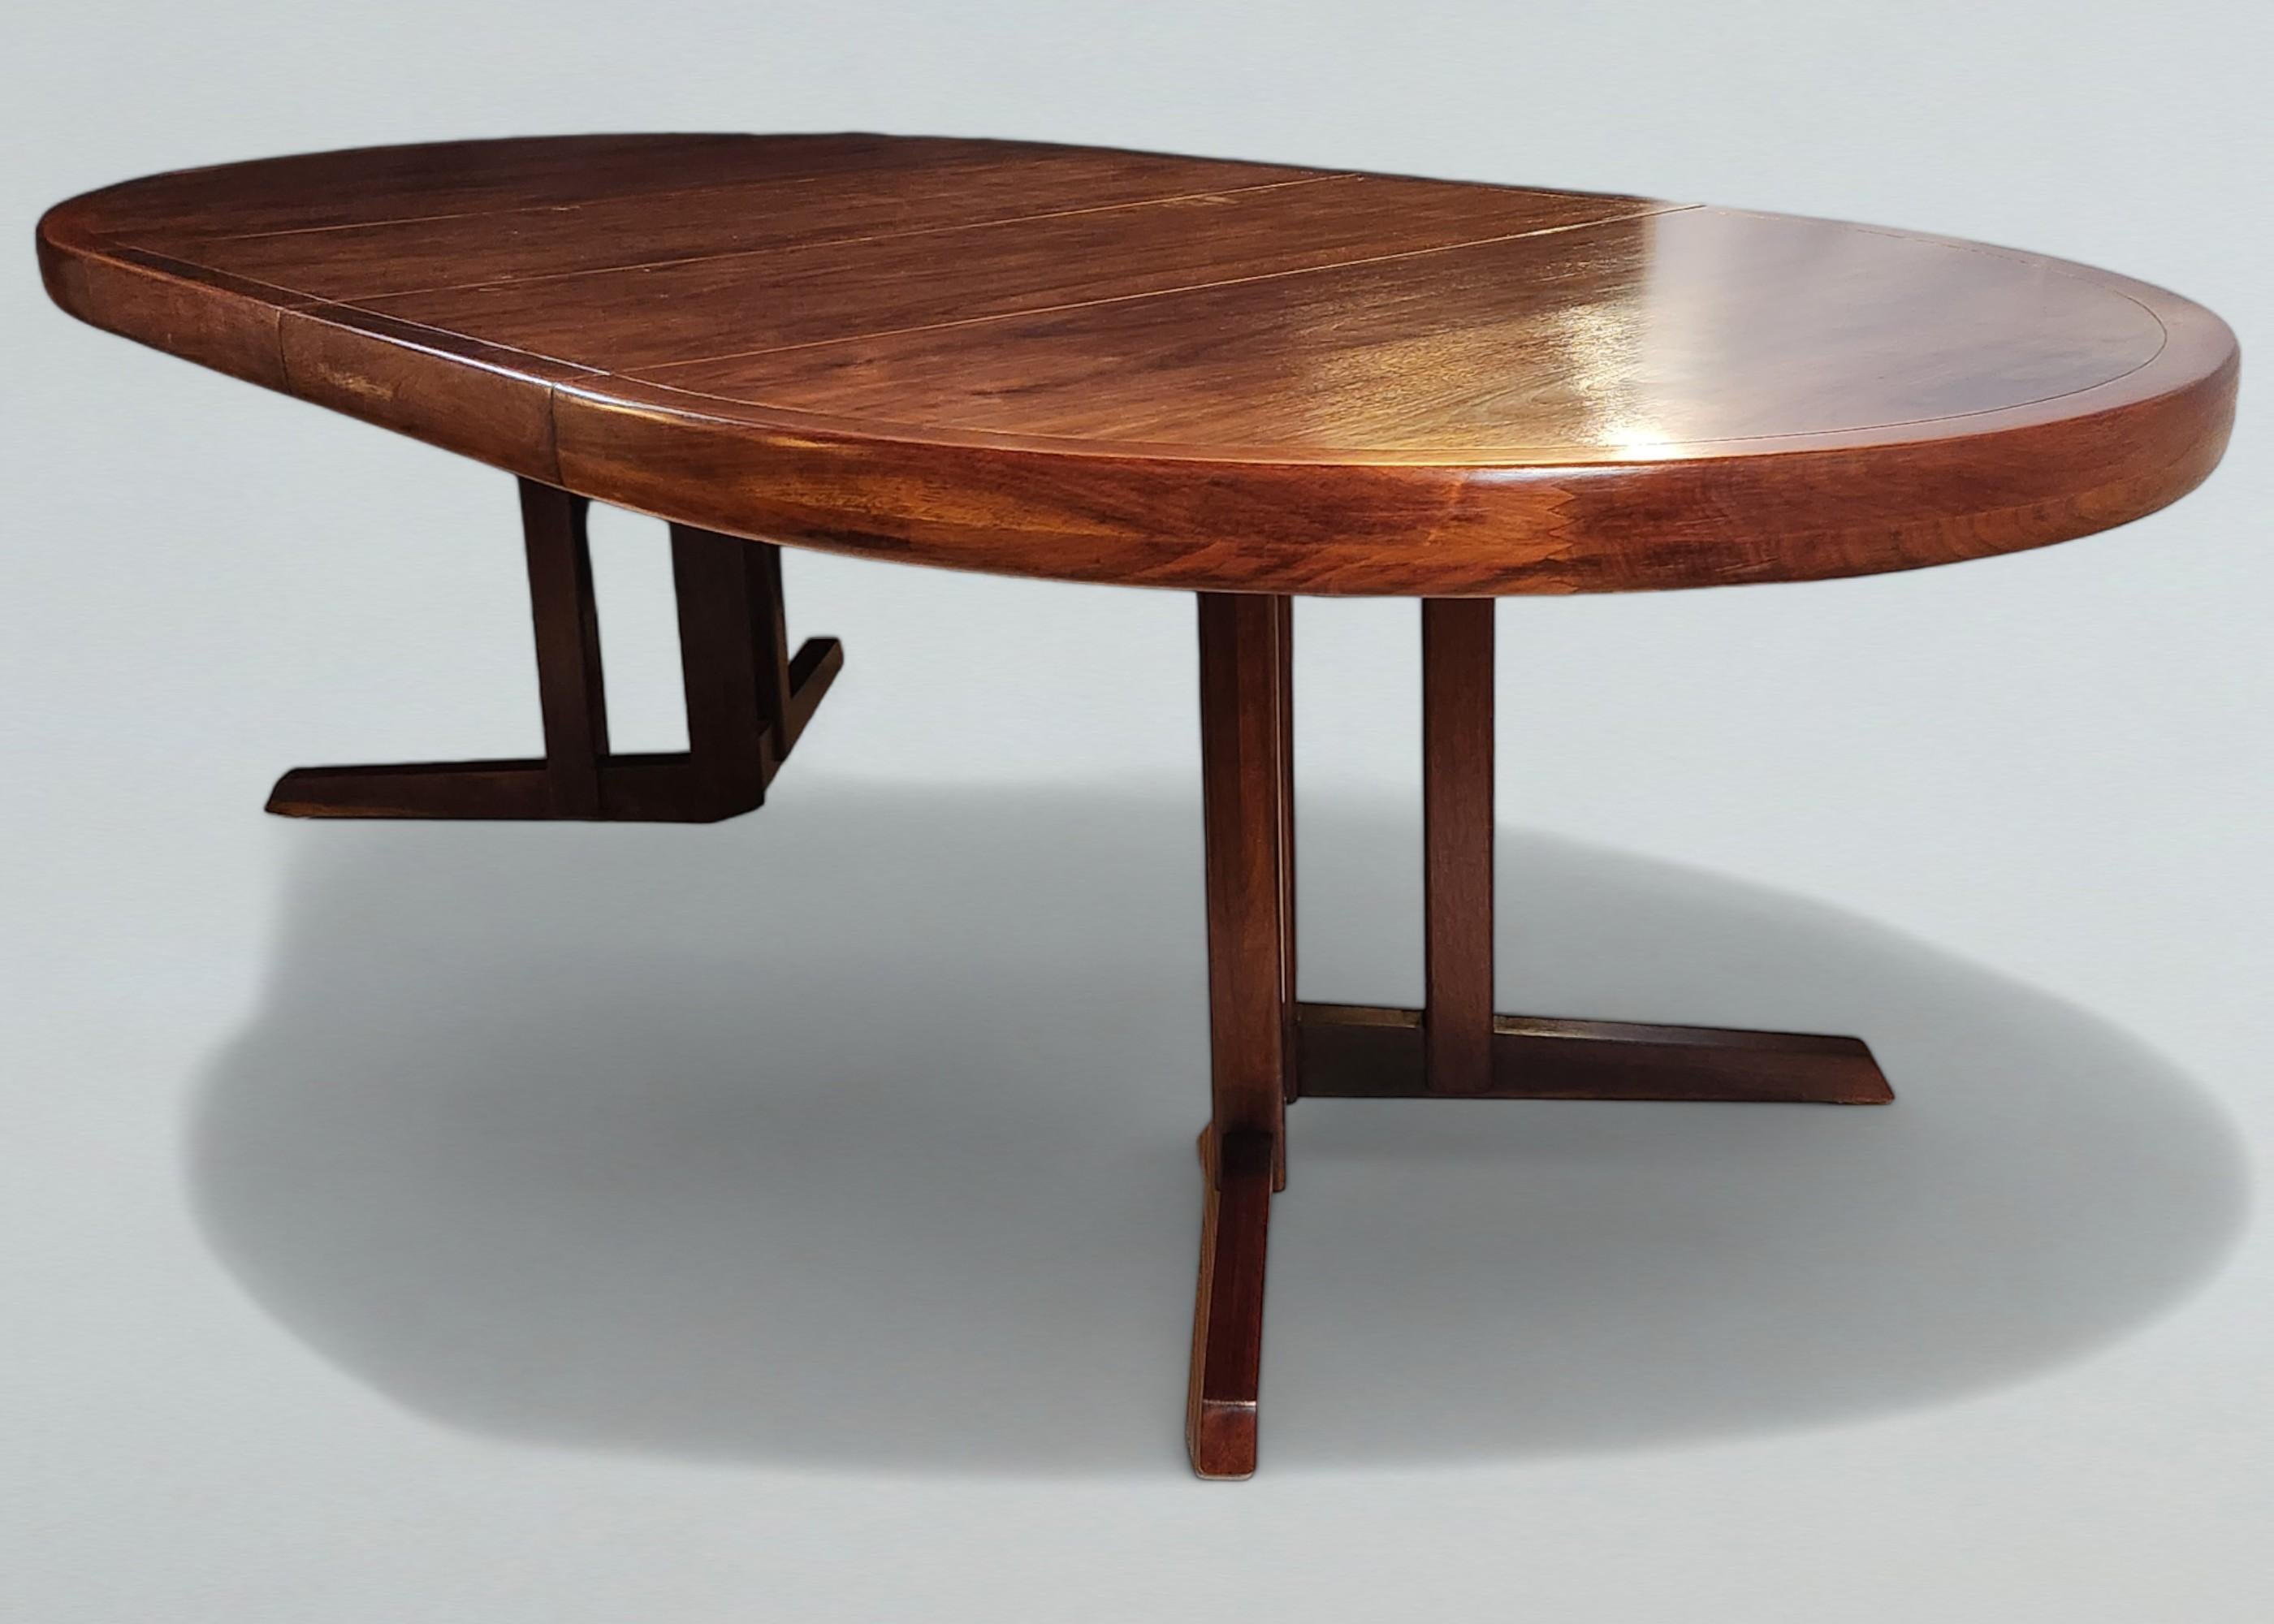 Mid-Century Modern George Nakashima Extendable Walnut Dining Table Model 277 for Widdicomb, 1959 For Sale